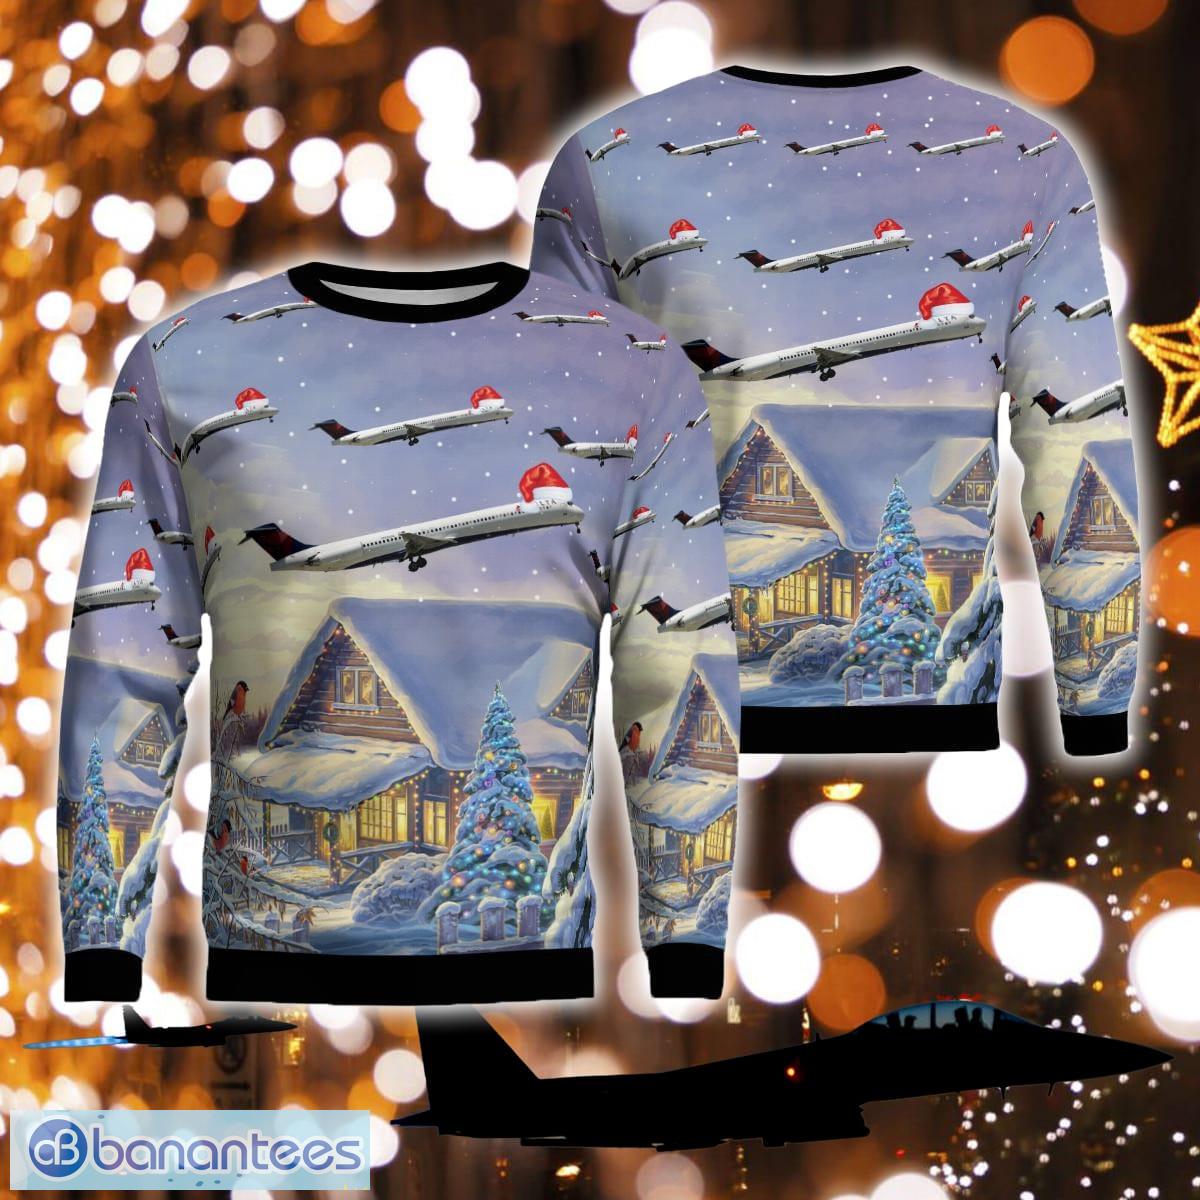 Delta Air Lines McDonnell Douglas MD-88 Knitted Xmas Sweater AOP - Delta Air Lines McDonnell Douglas MD-88 Ugly Christmas Sweater Photo 1